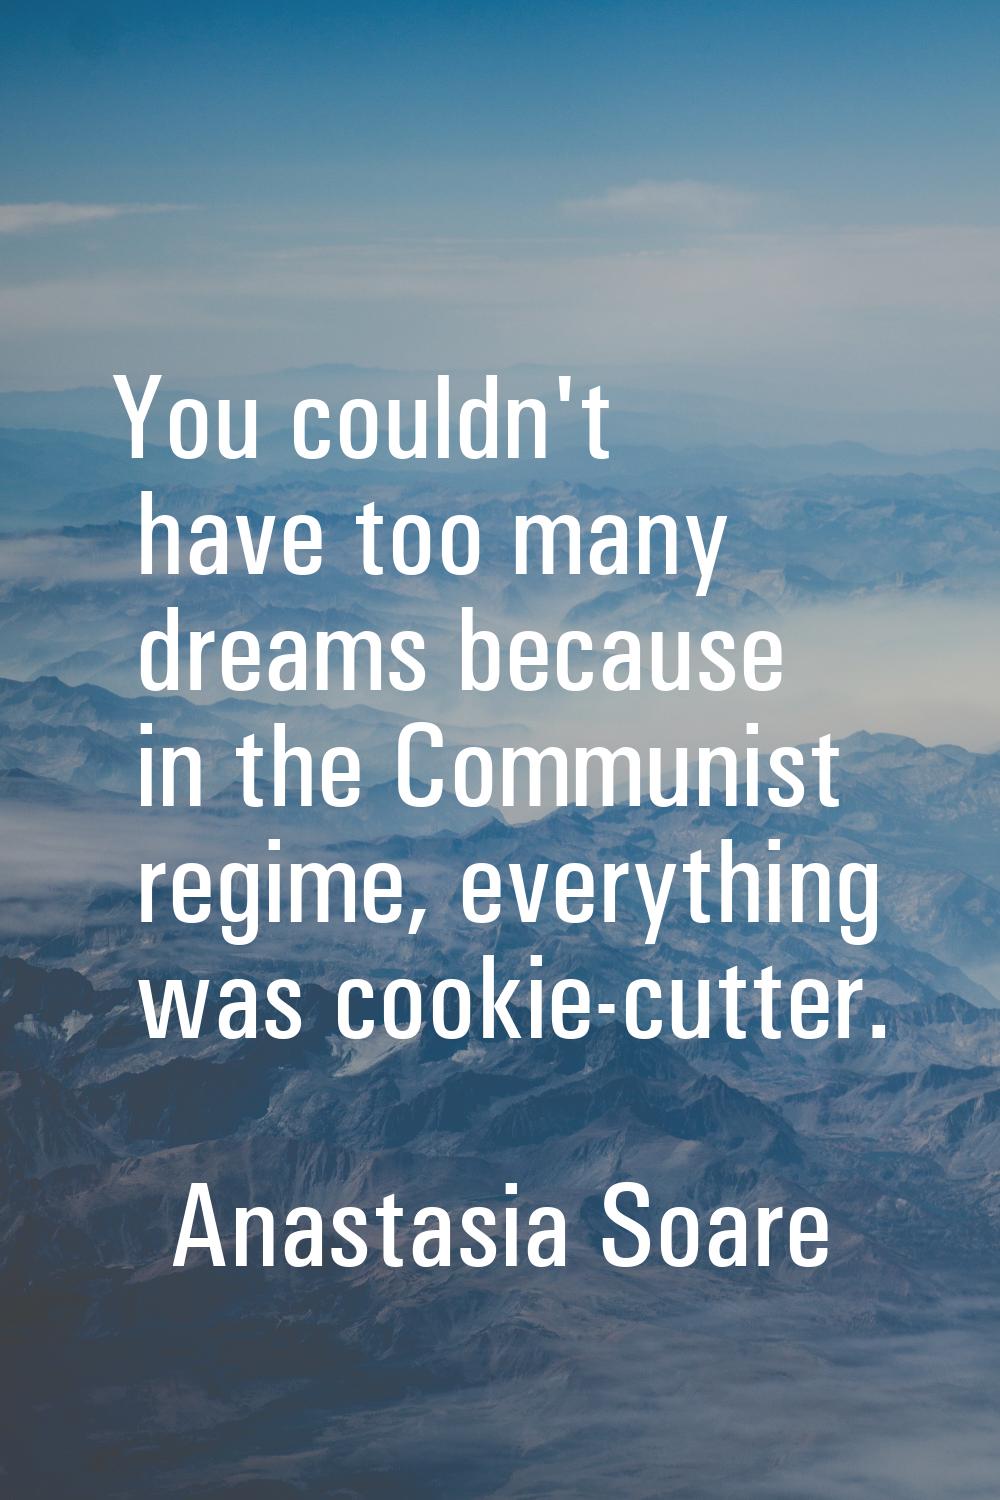 You couldn't have too many dreams because in the Communist regime, everything was cookie-cutter.